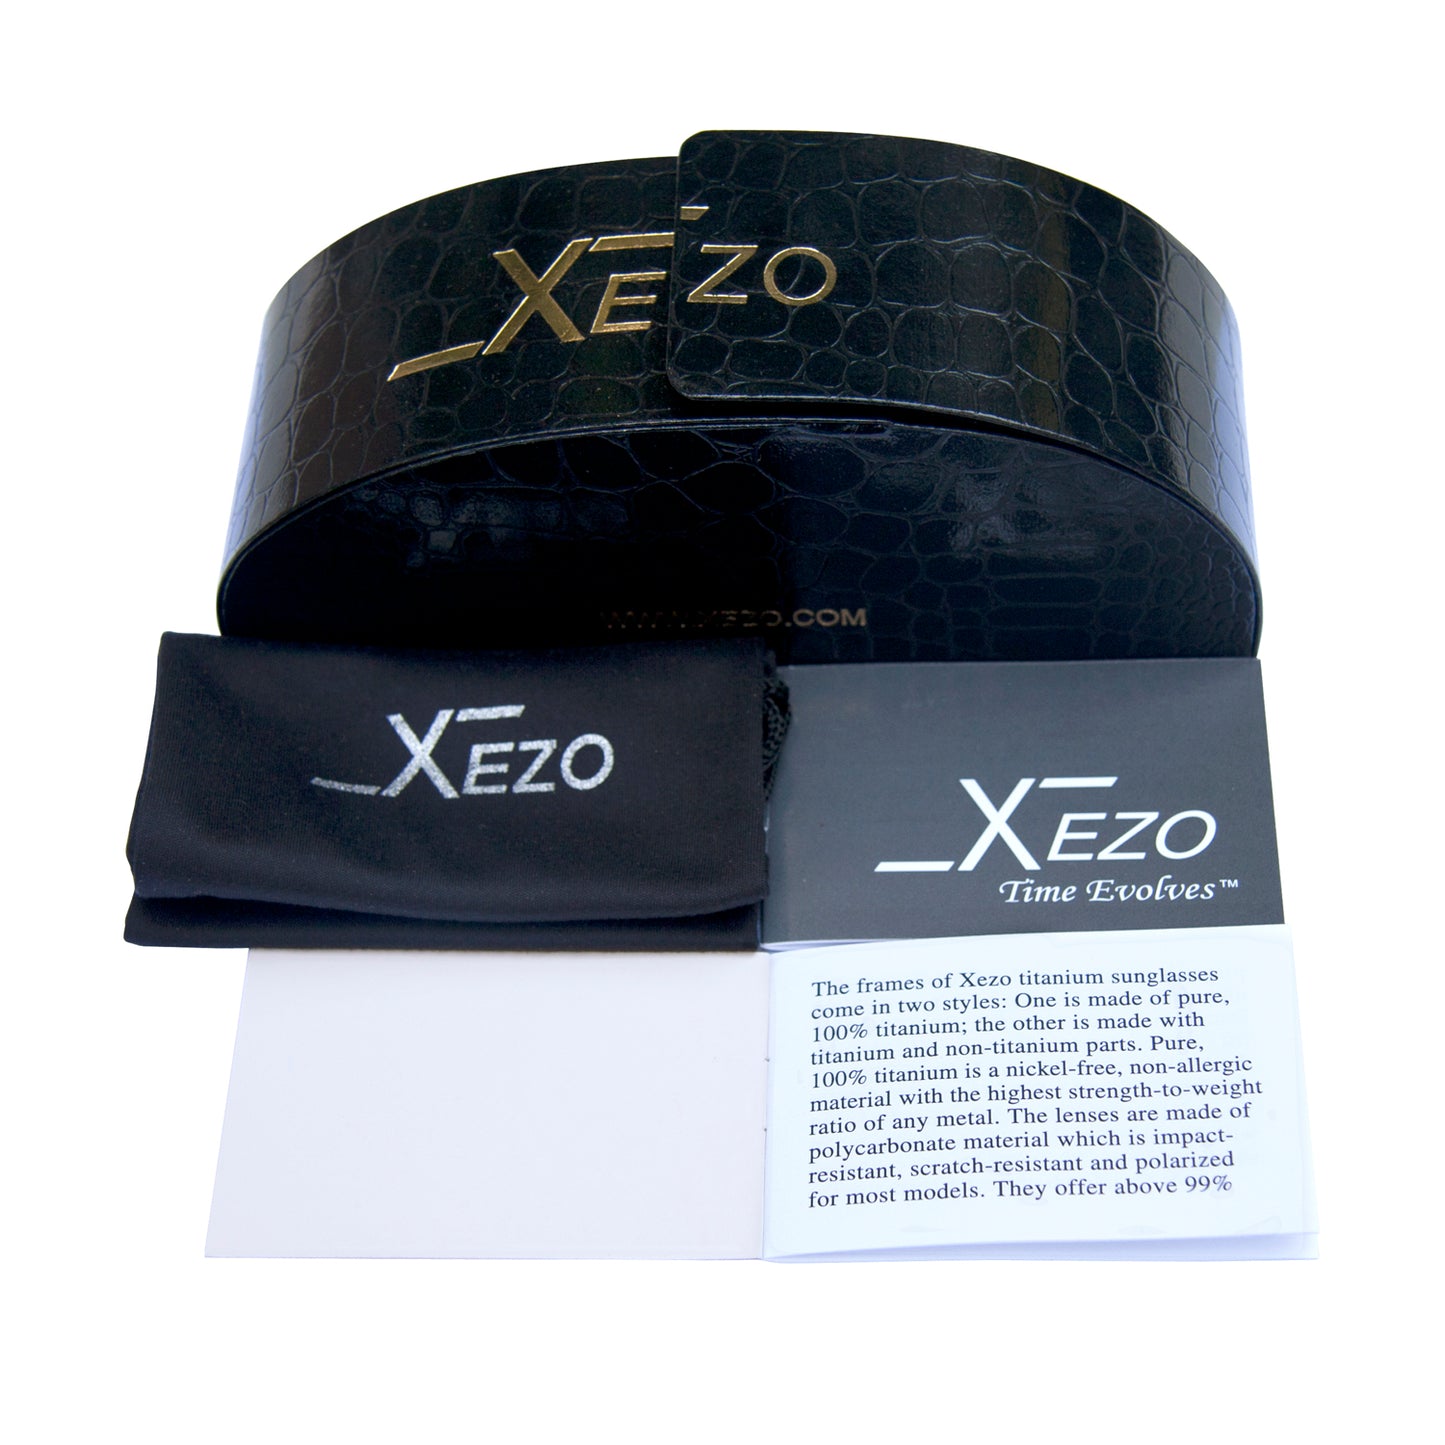 Xezo - Black gift box, Black bag, and certificate of a pair of Air Commando 2400 G sunglasses